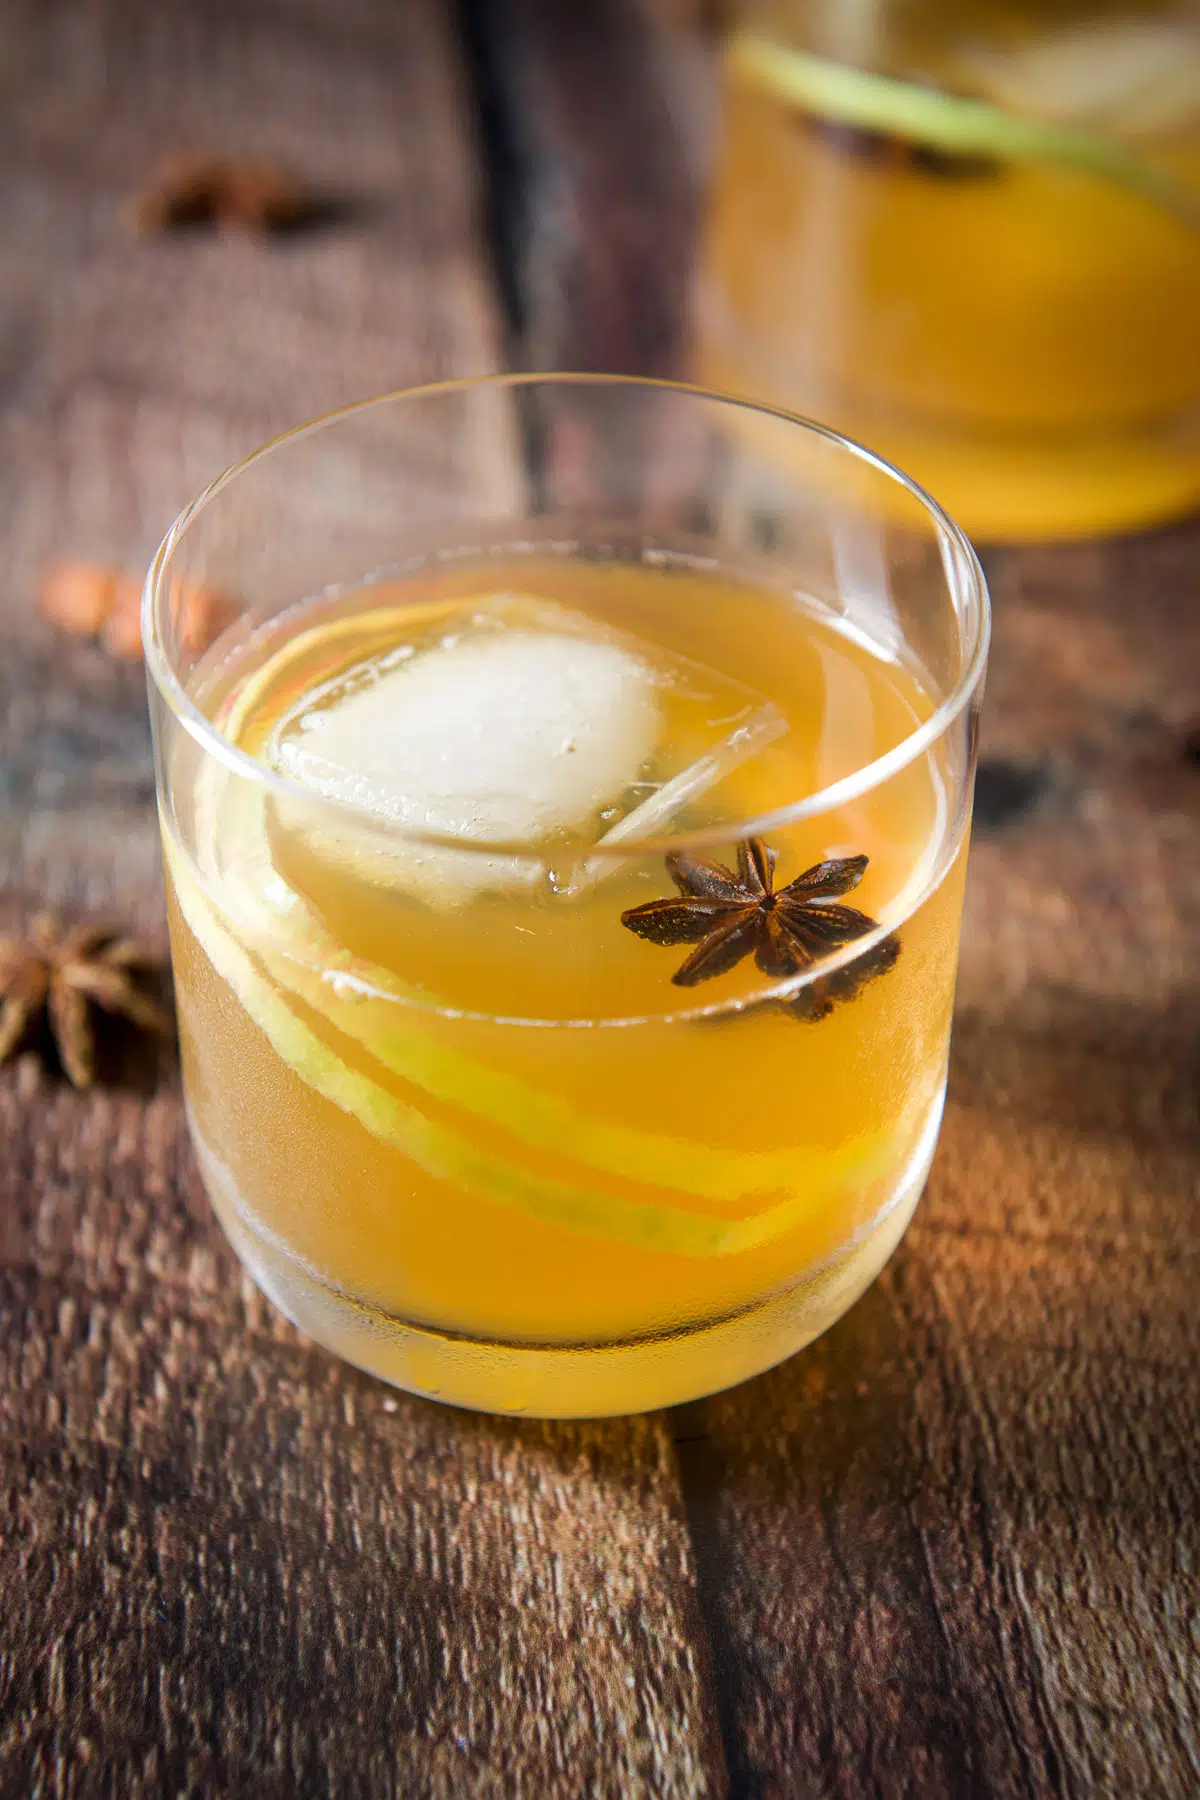 A double old fashioned glass with the amber cocktail in it with a star anise floating